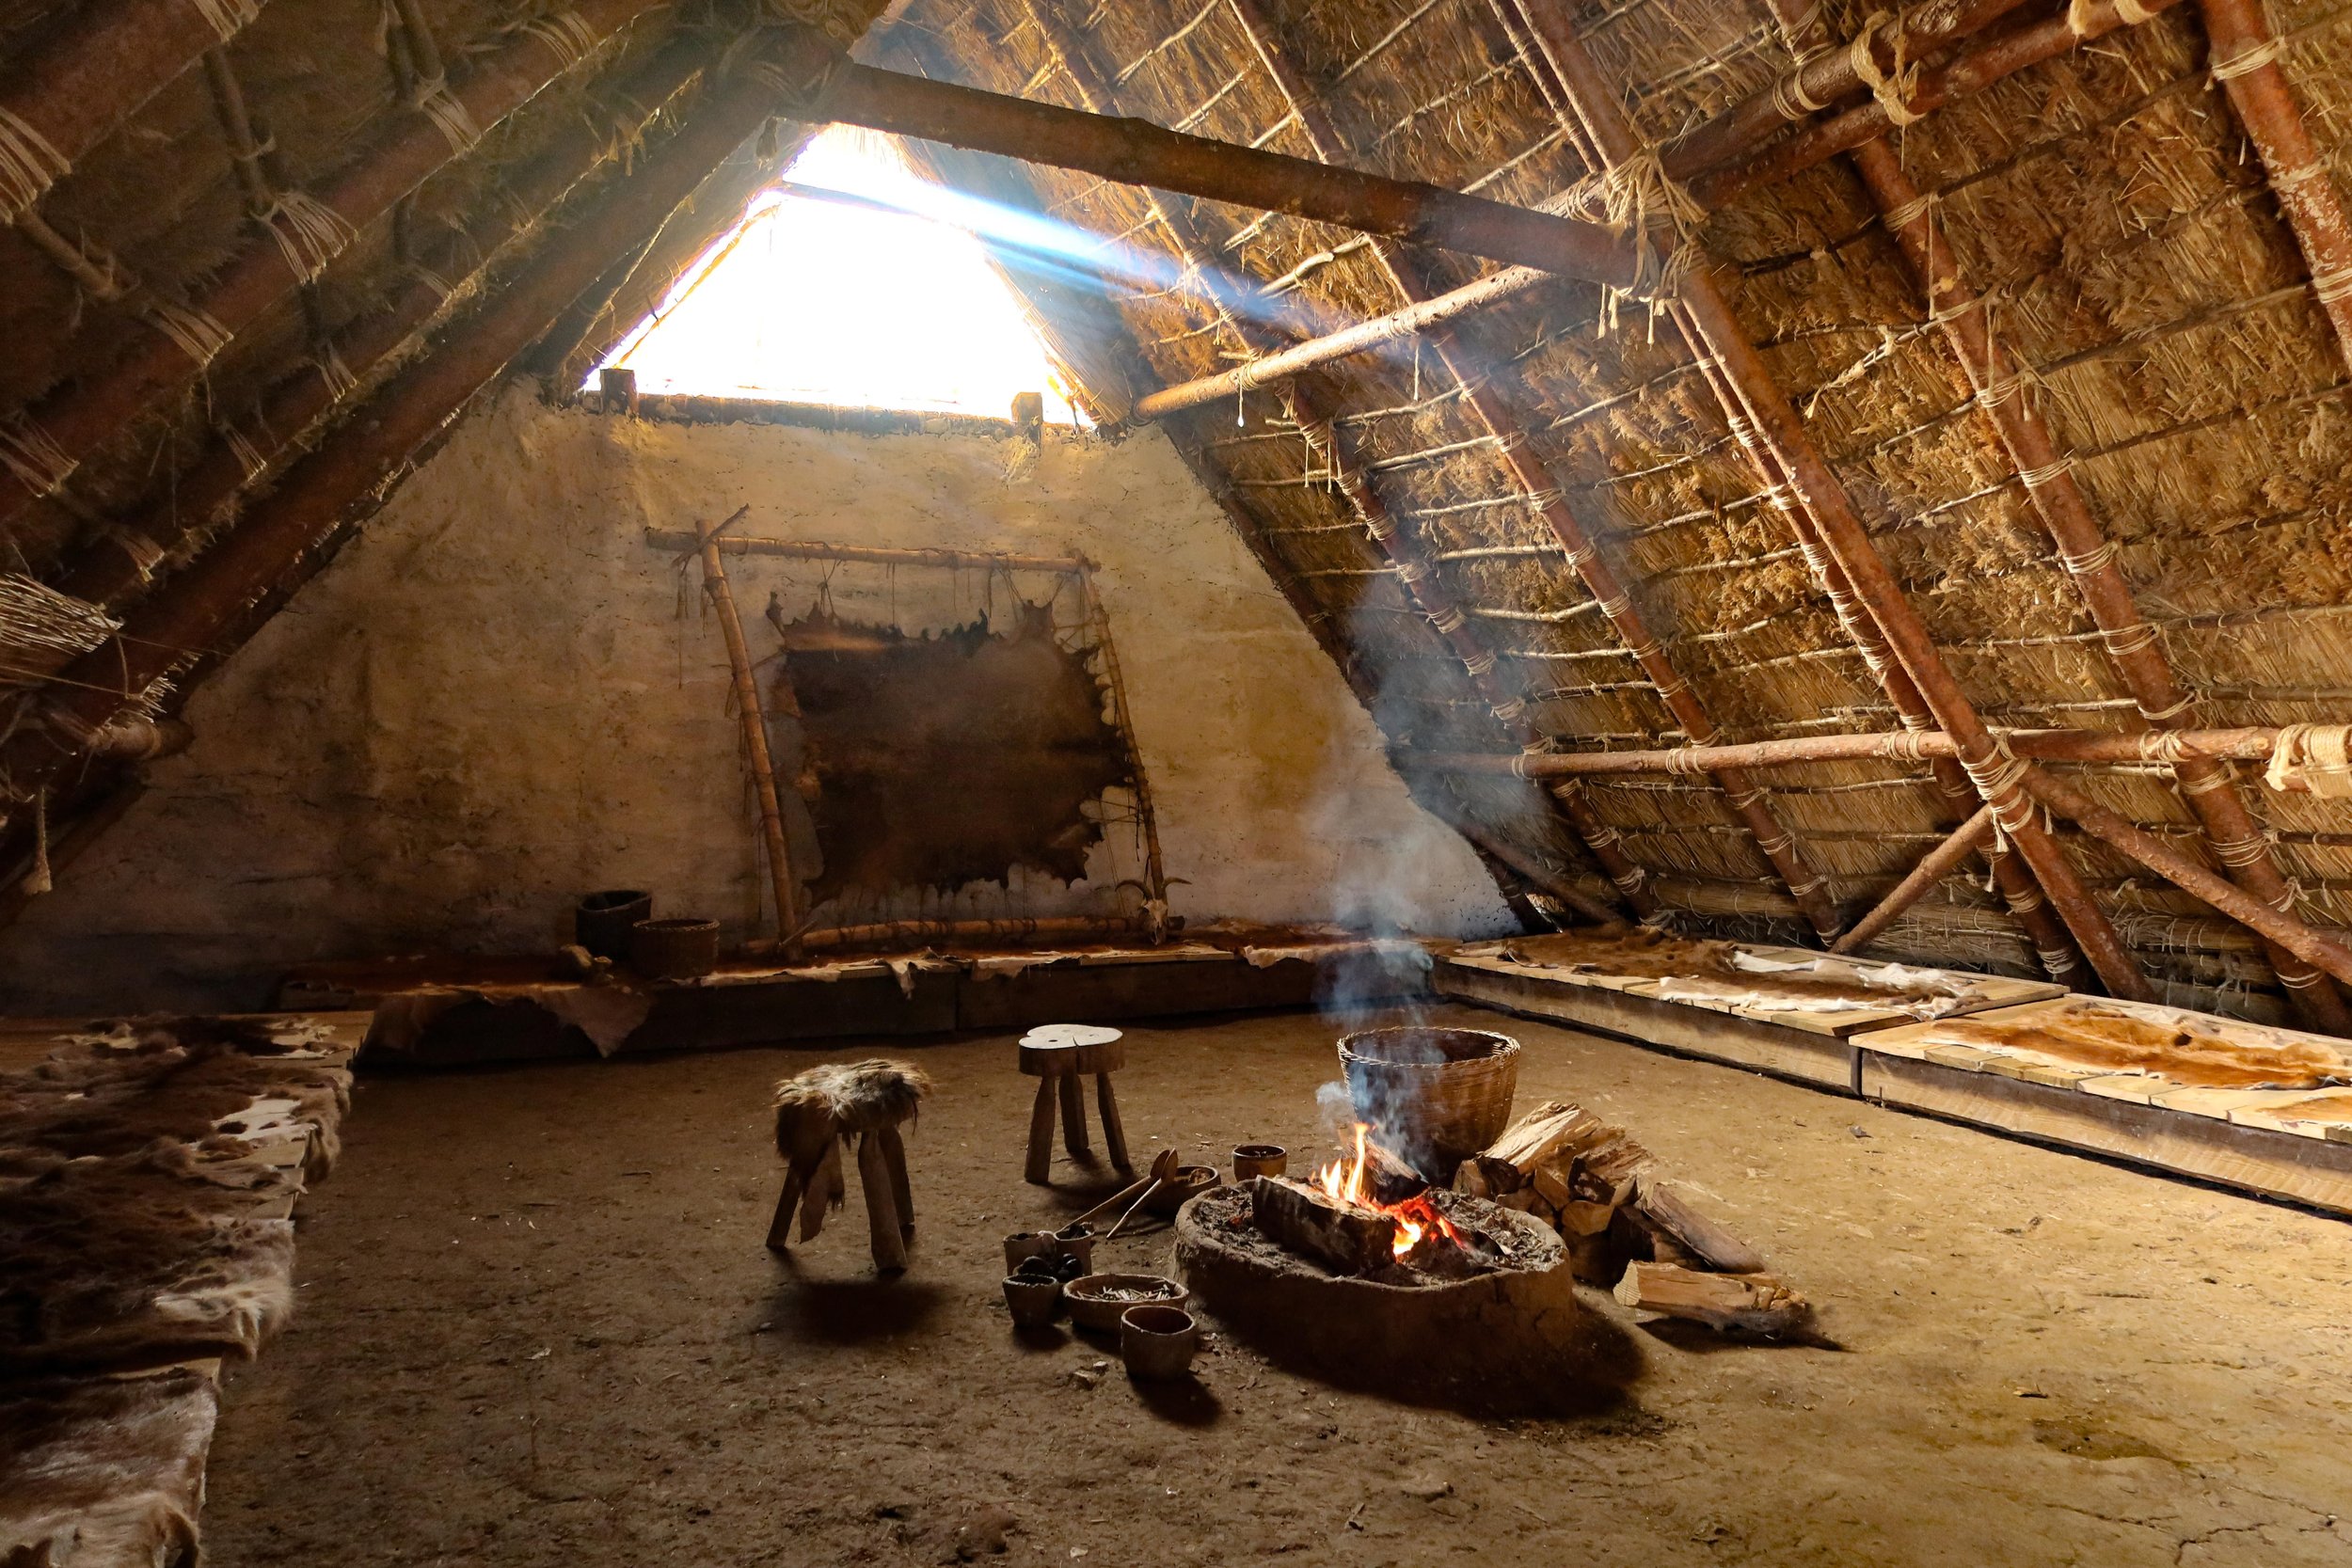 The interior of our Stone Age house